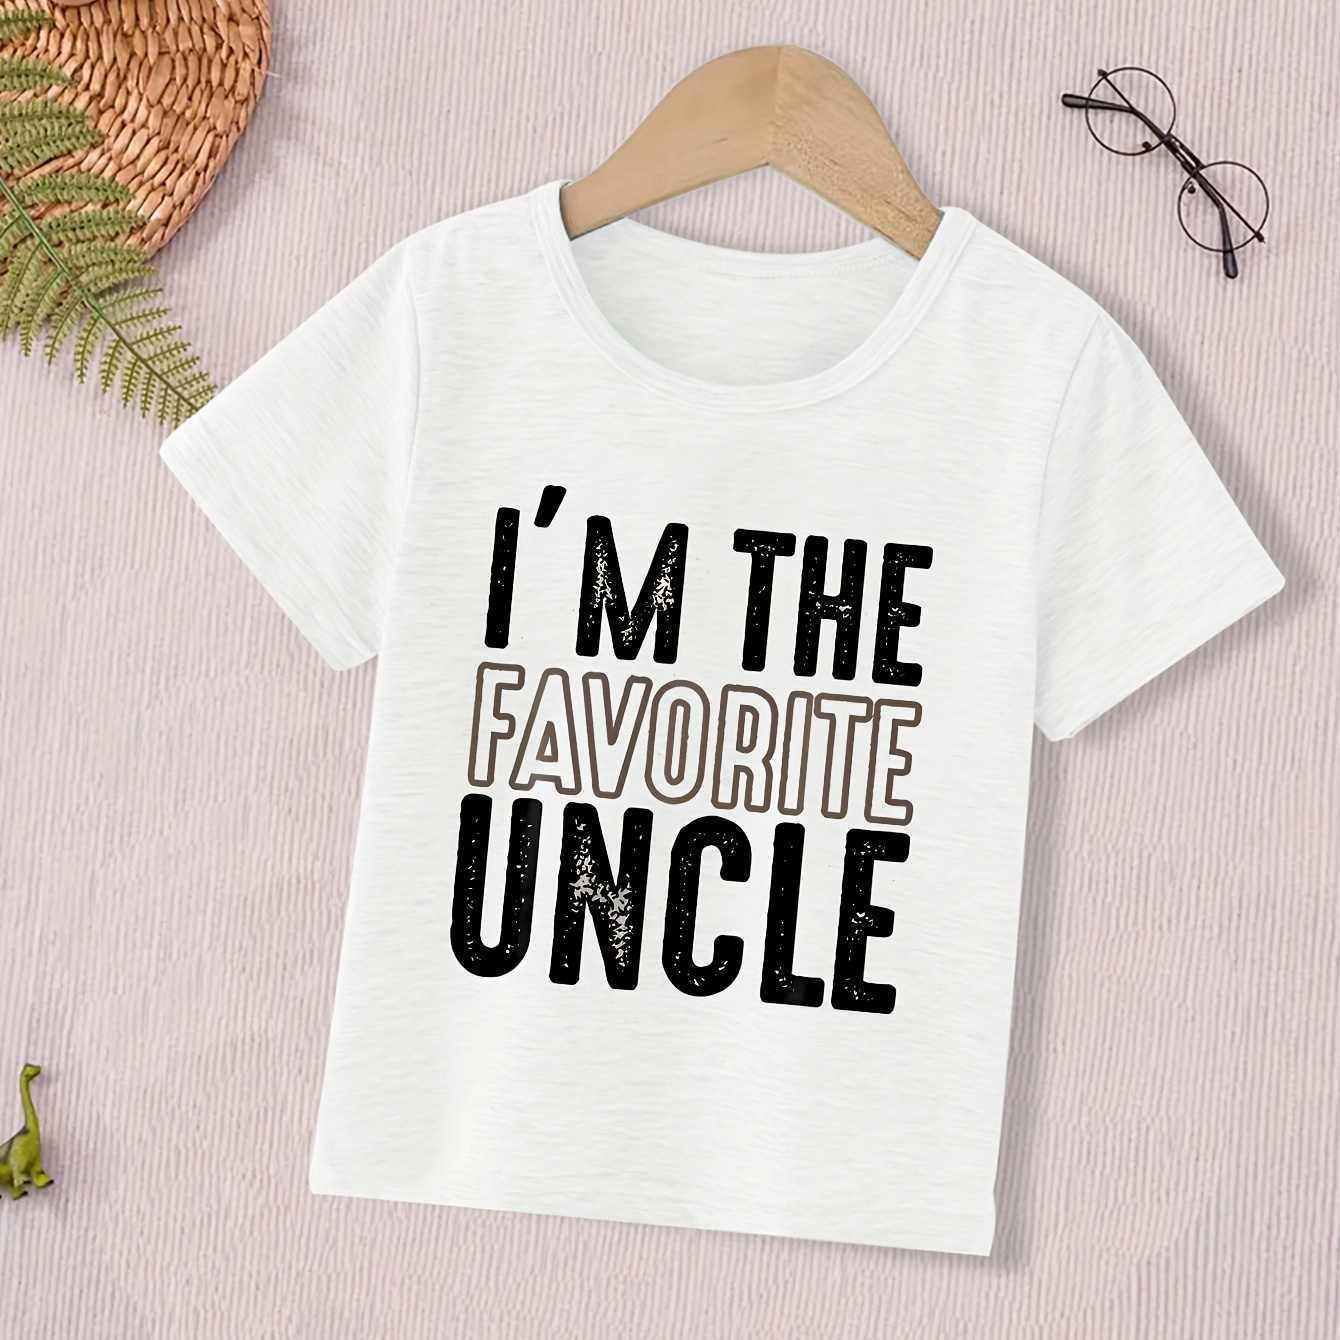 

I'm The Favorite Uncle Print Boys Casual T-shirt, Cool Comfy Lightweight Versatile Tee Top, Perfect Summer Clothing